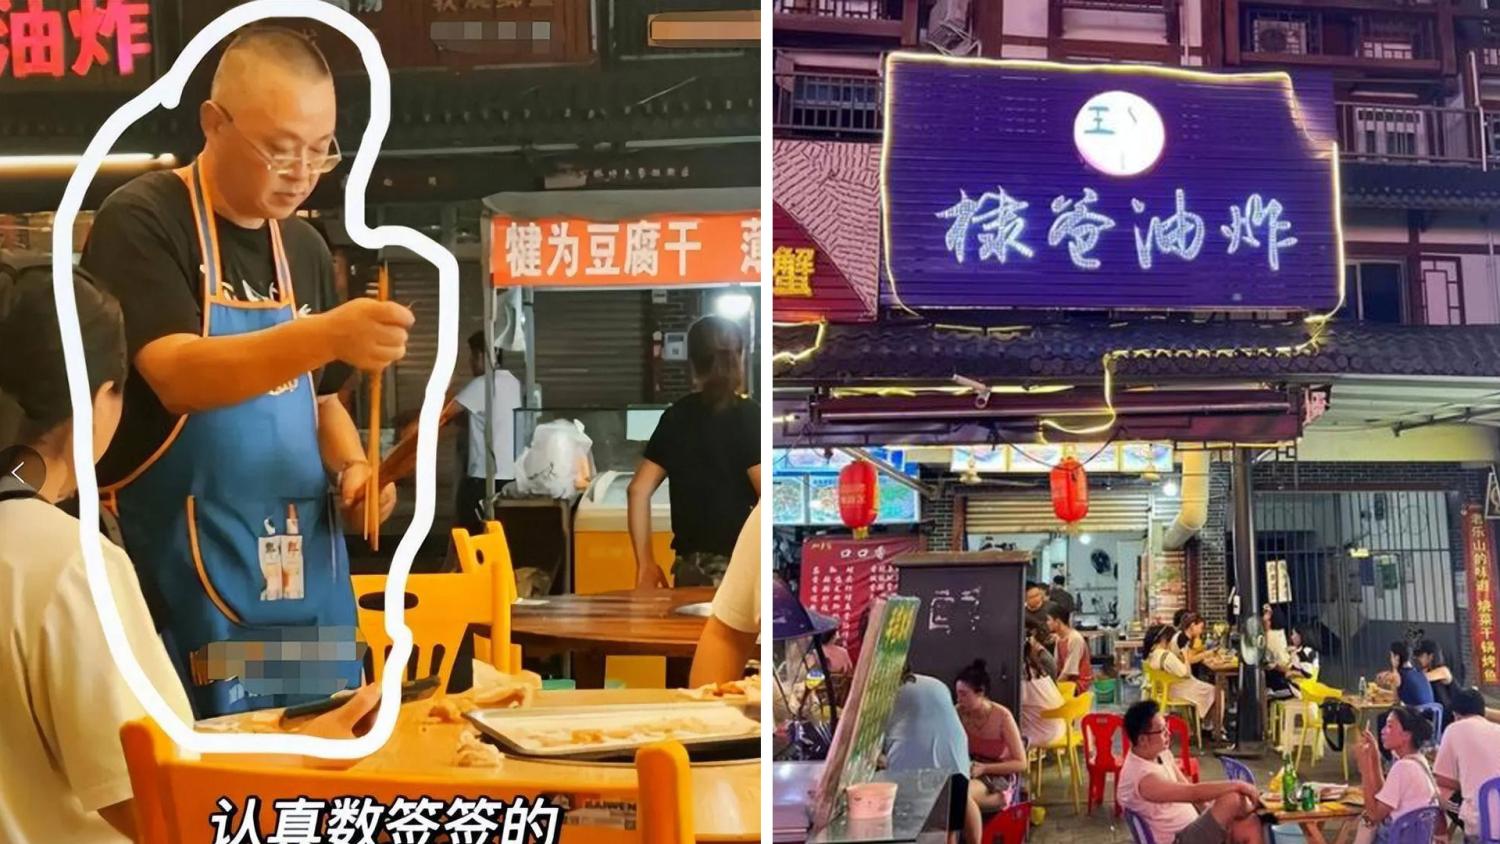 Woman Seen Hurling Chairs And Abuse At What Looks Like Chinese